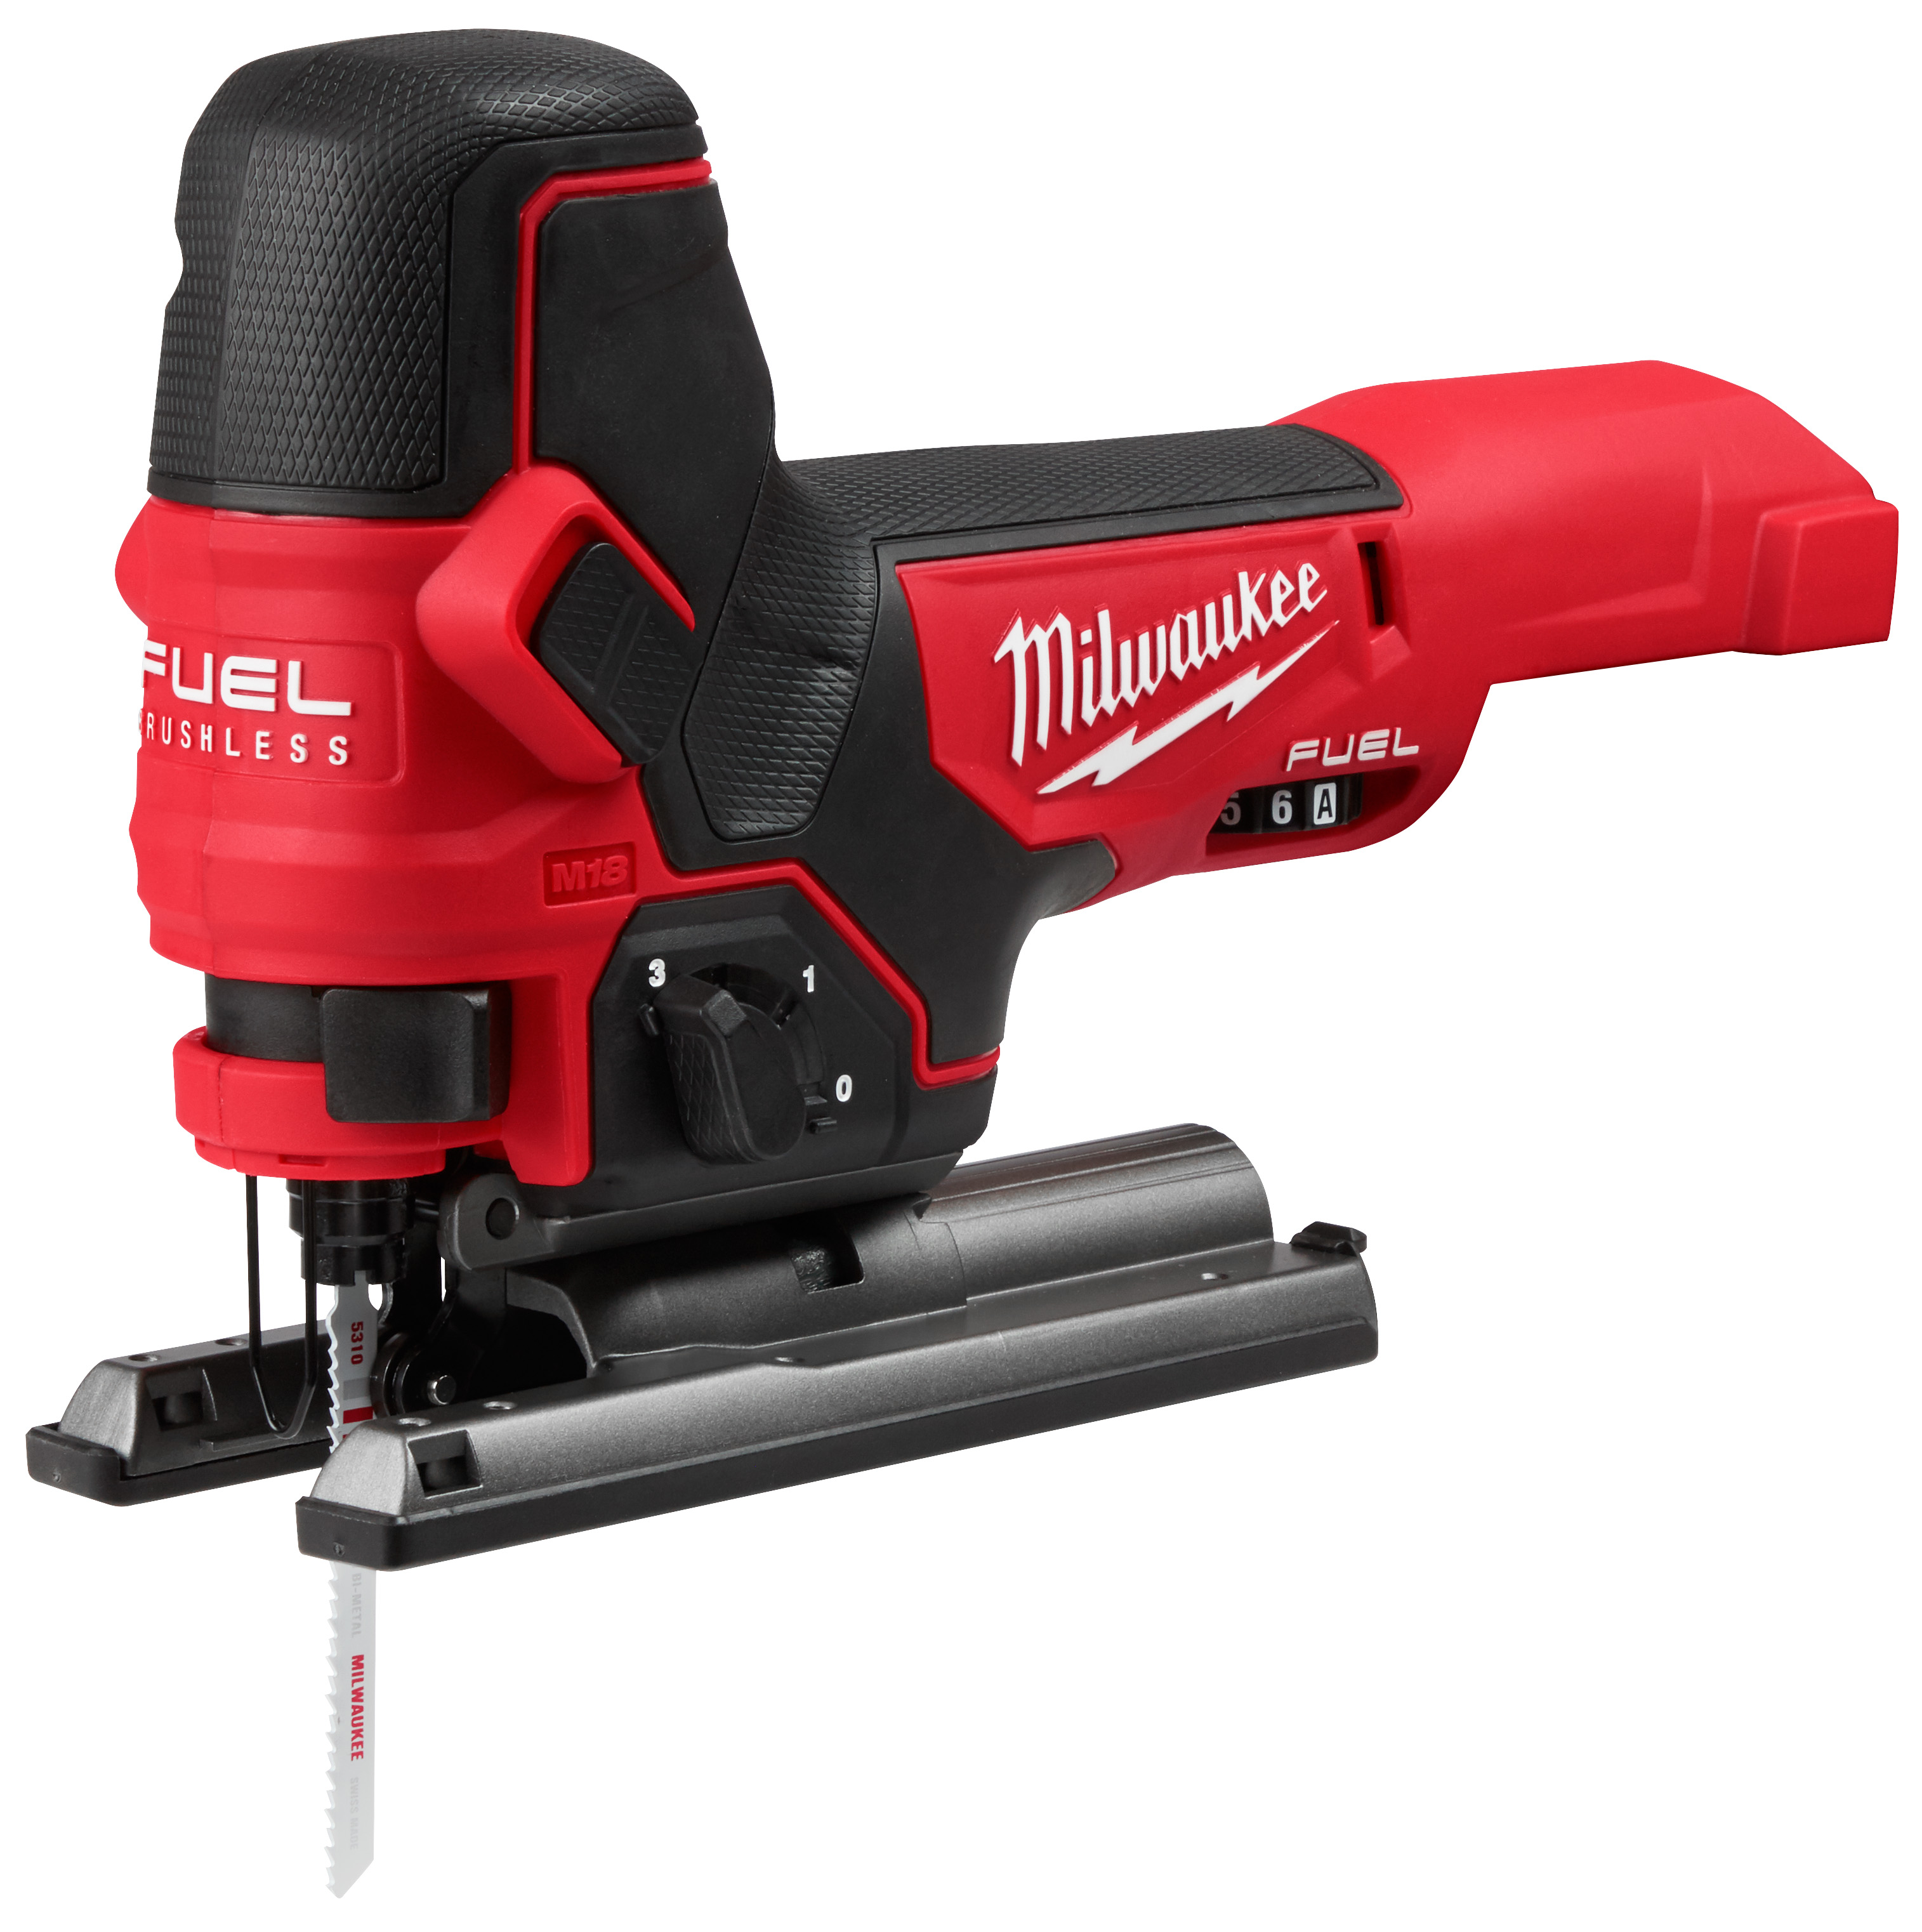 M18 FUEL 18 Volt Lithium-Ion Cordless Barrel Grip Jig Saw - Tool Only